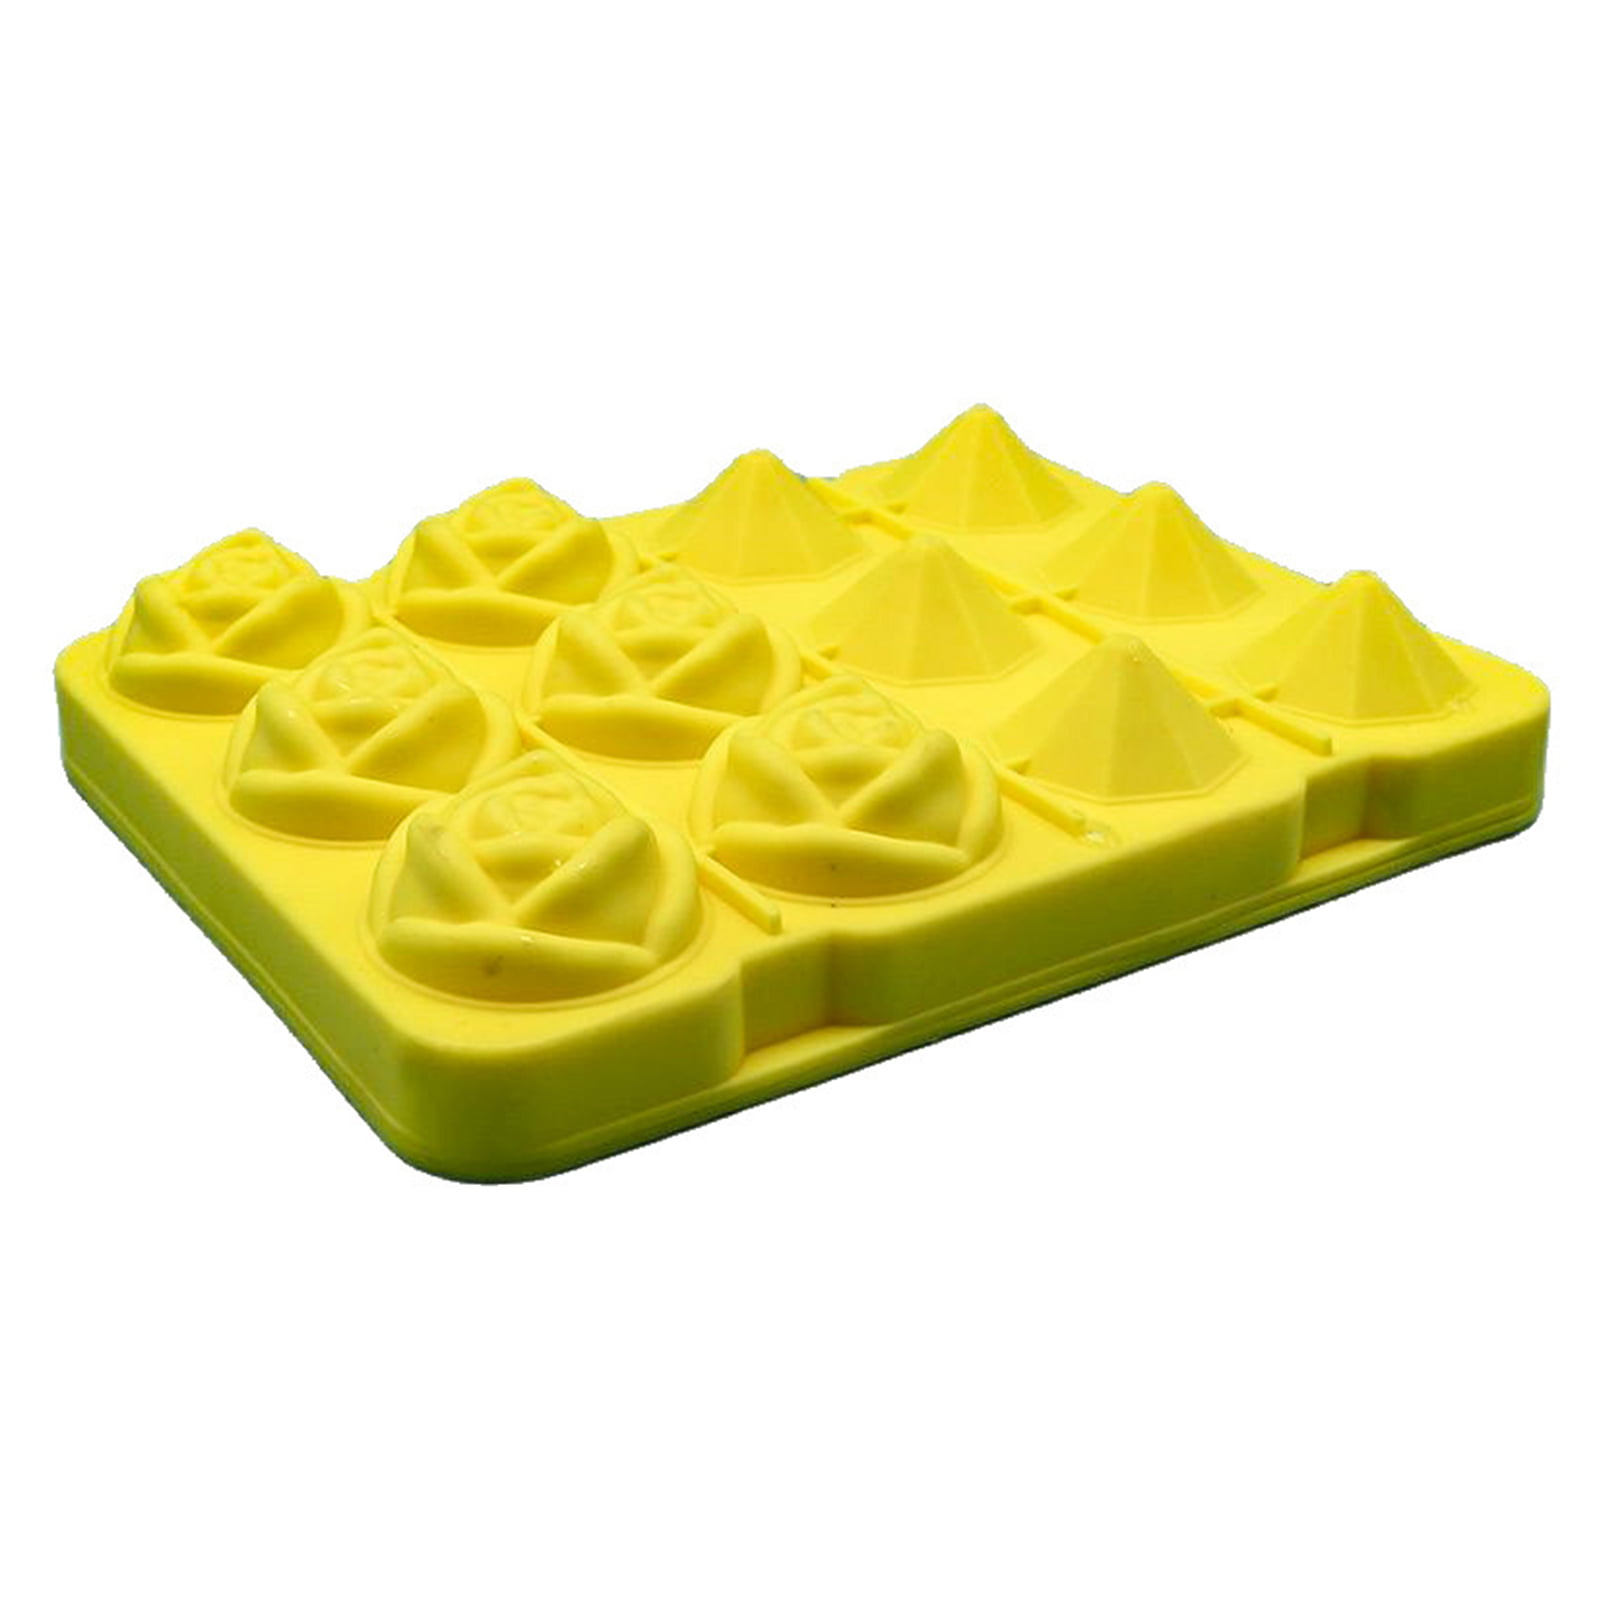 Fulande 3D Rose Ice Molds,2 inch Large Ice Cube Trays, Make 4 Giant Cute Flower Shape Ice, Silicone Rubber Fun Big Ice Ball Maker for Cocktails Juice Whiskey